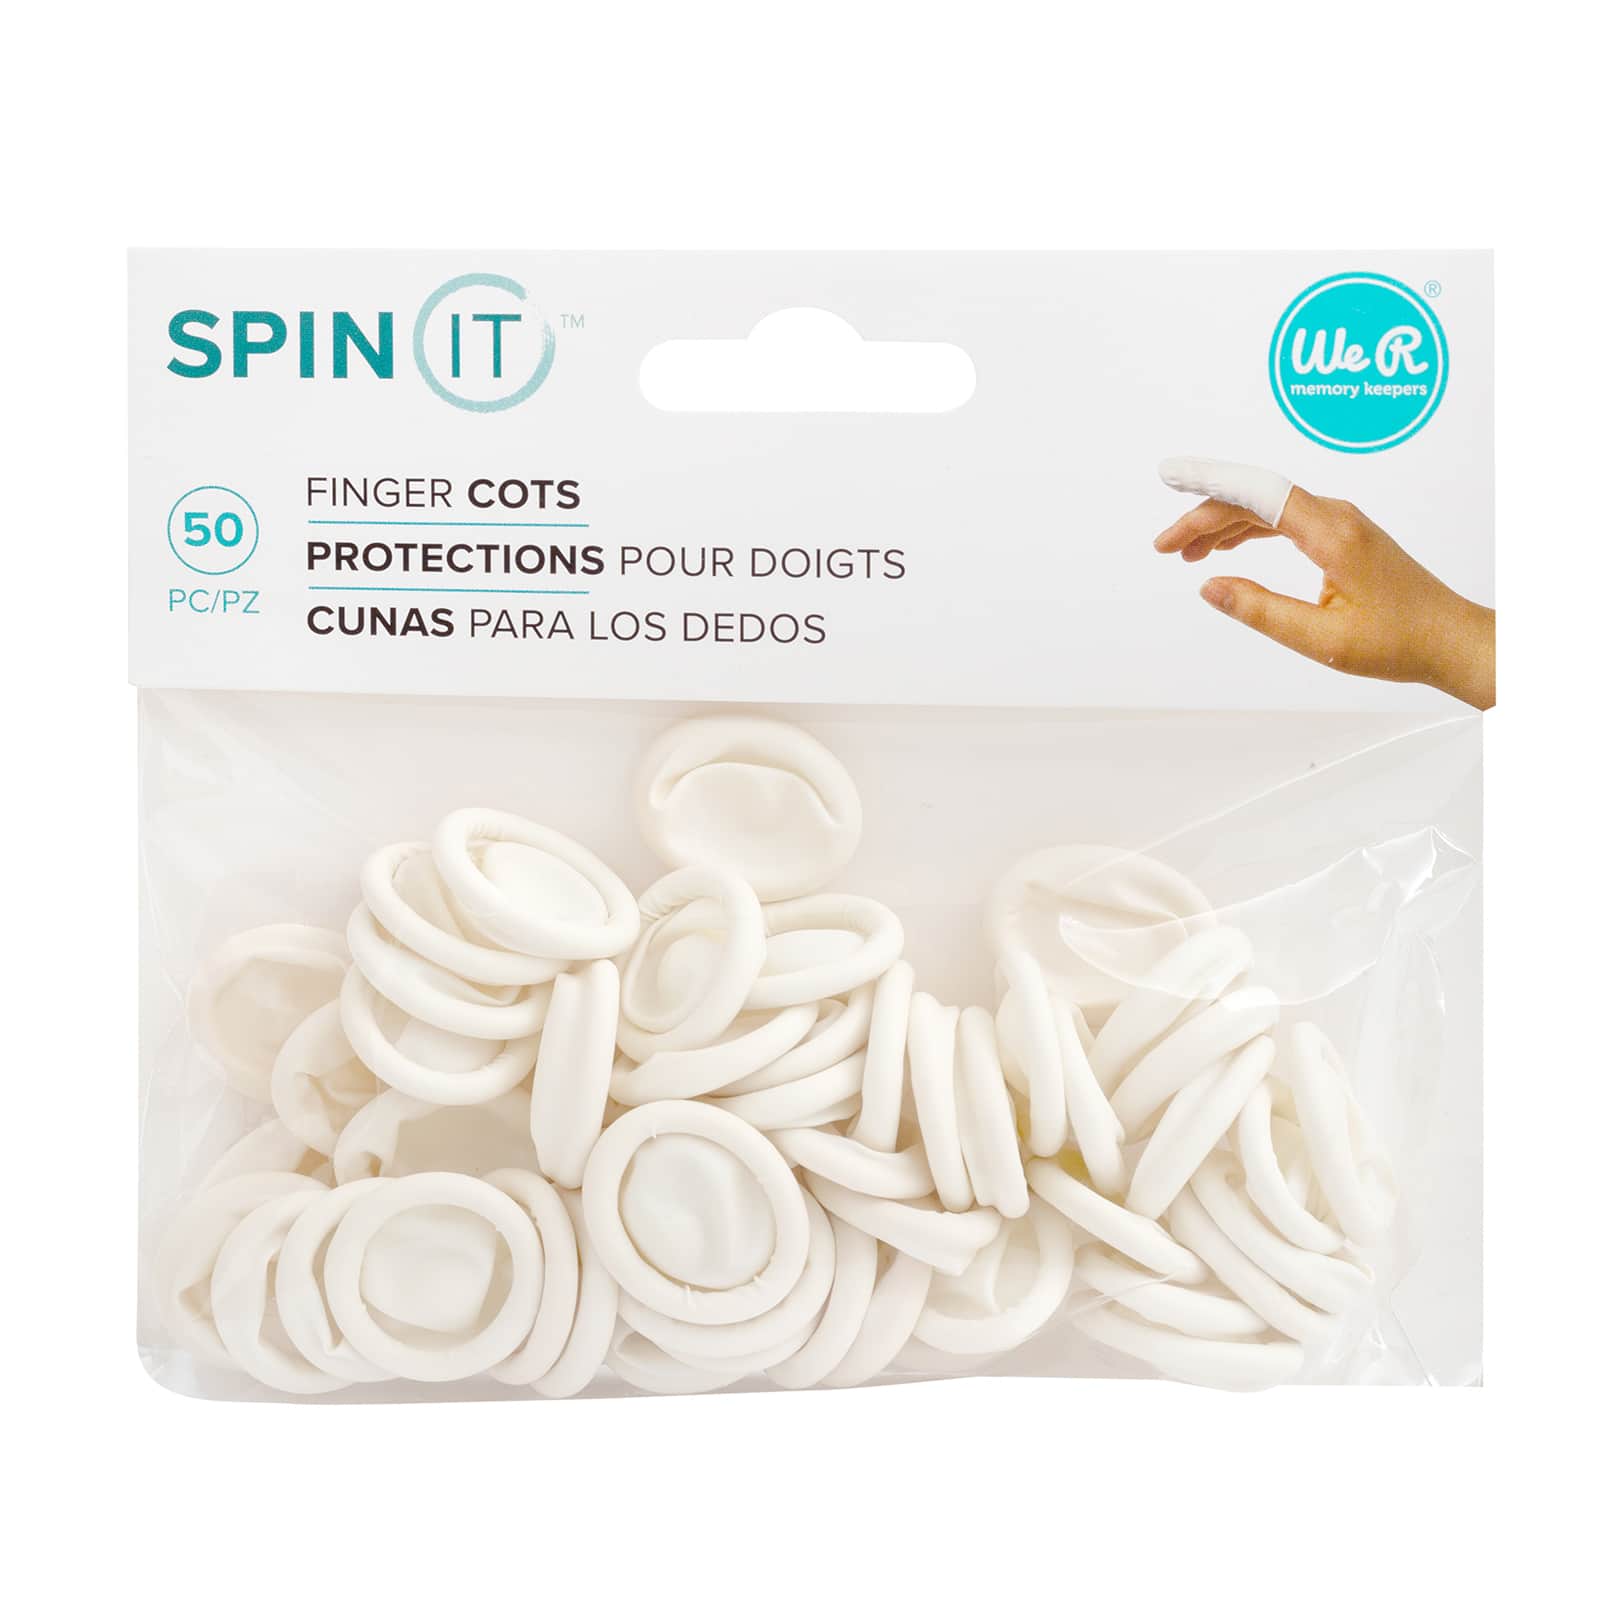 24 Packs: 50 ct. (1,200 total) We R Memory Keepers&#xAE; Spin It&#x2122; Finger Cots